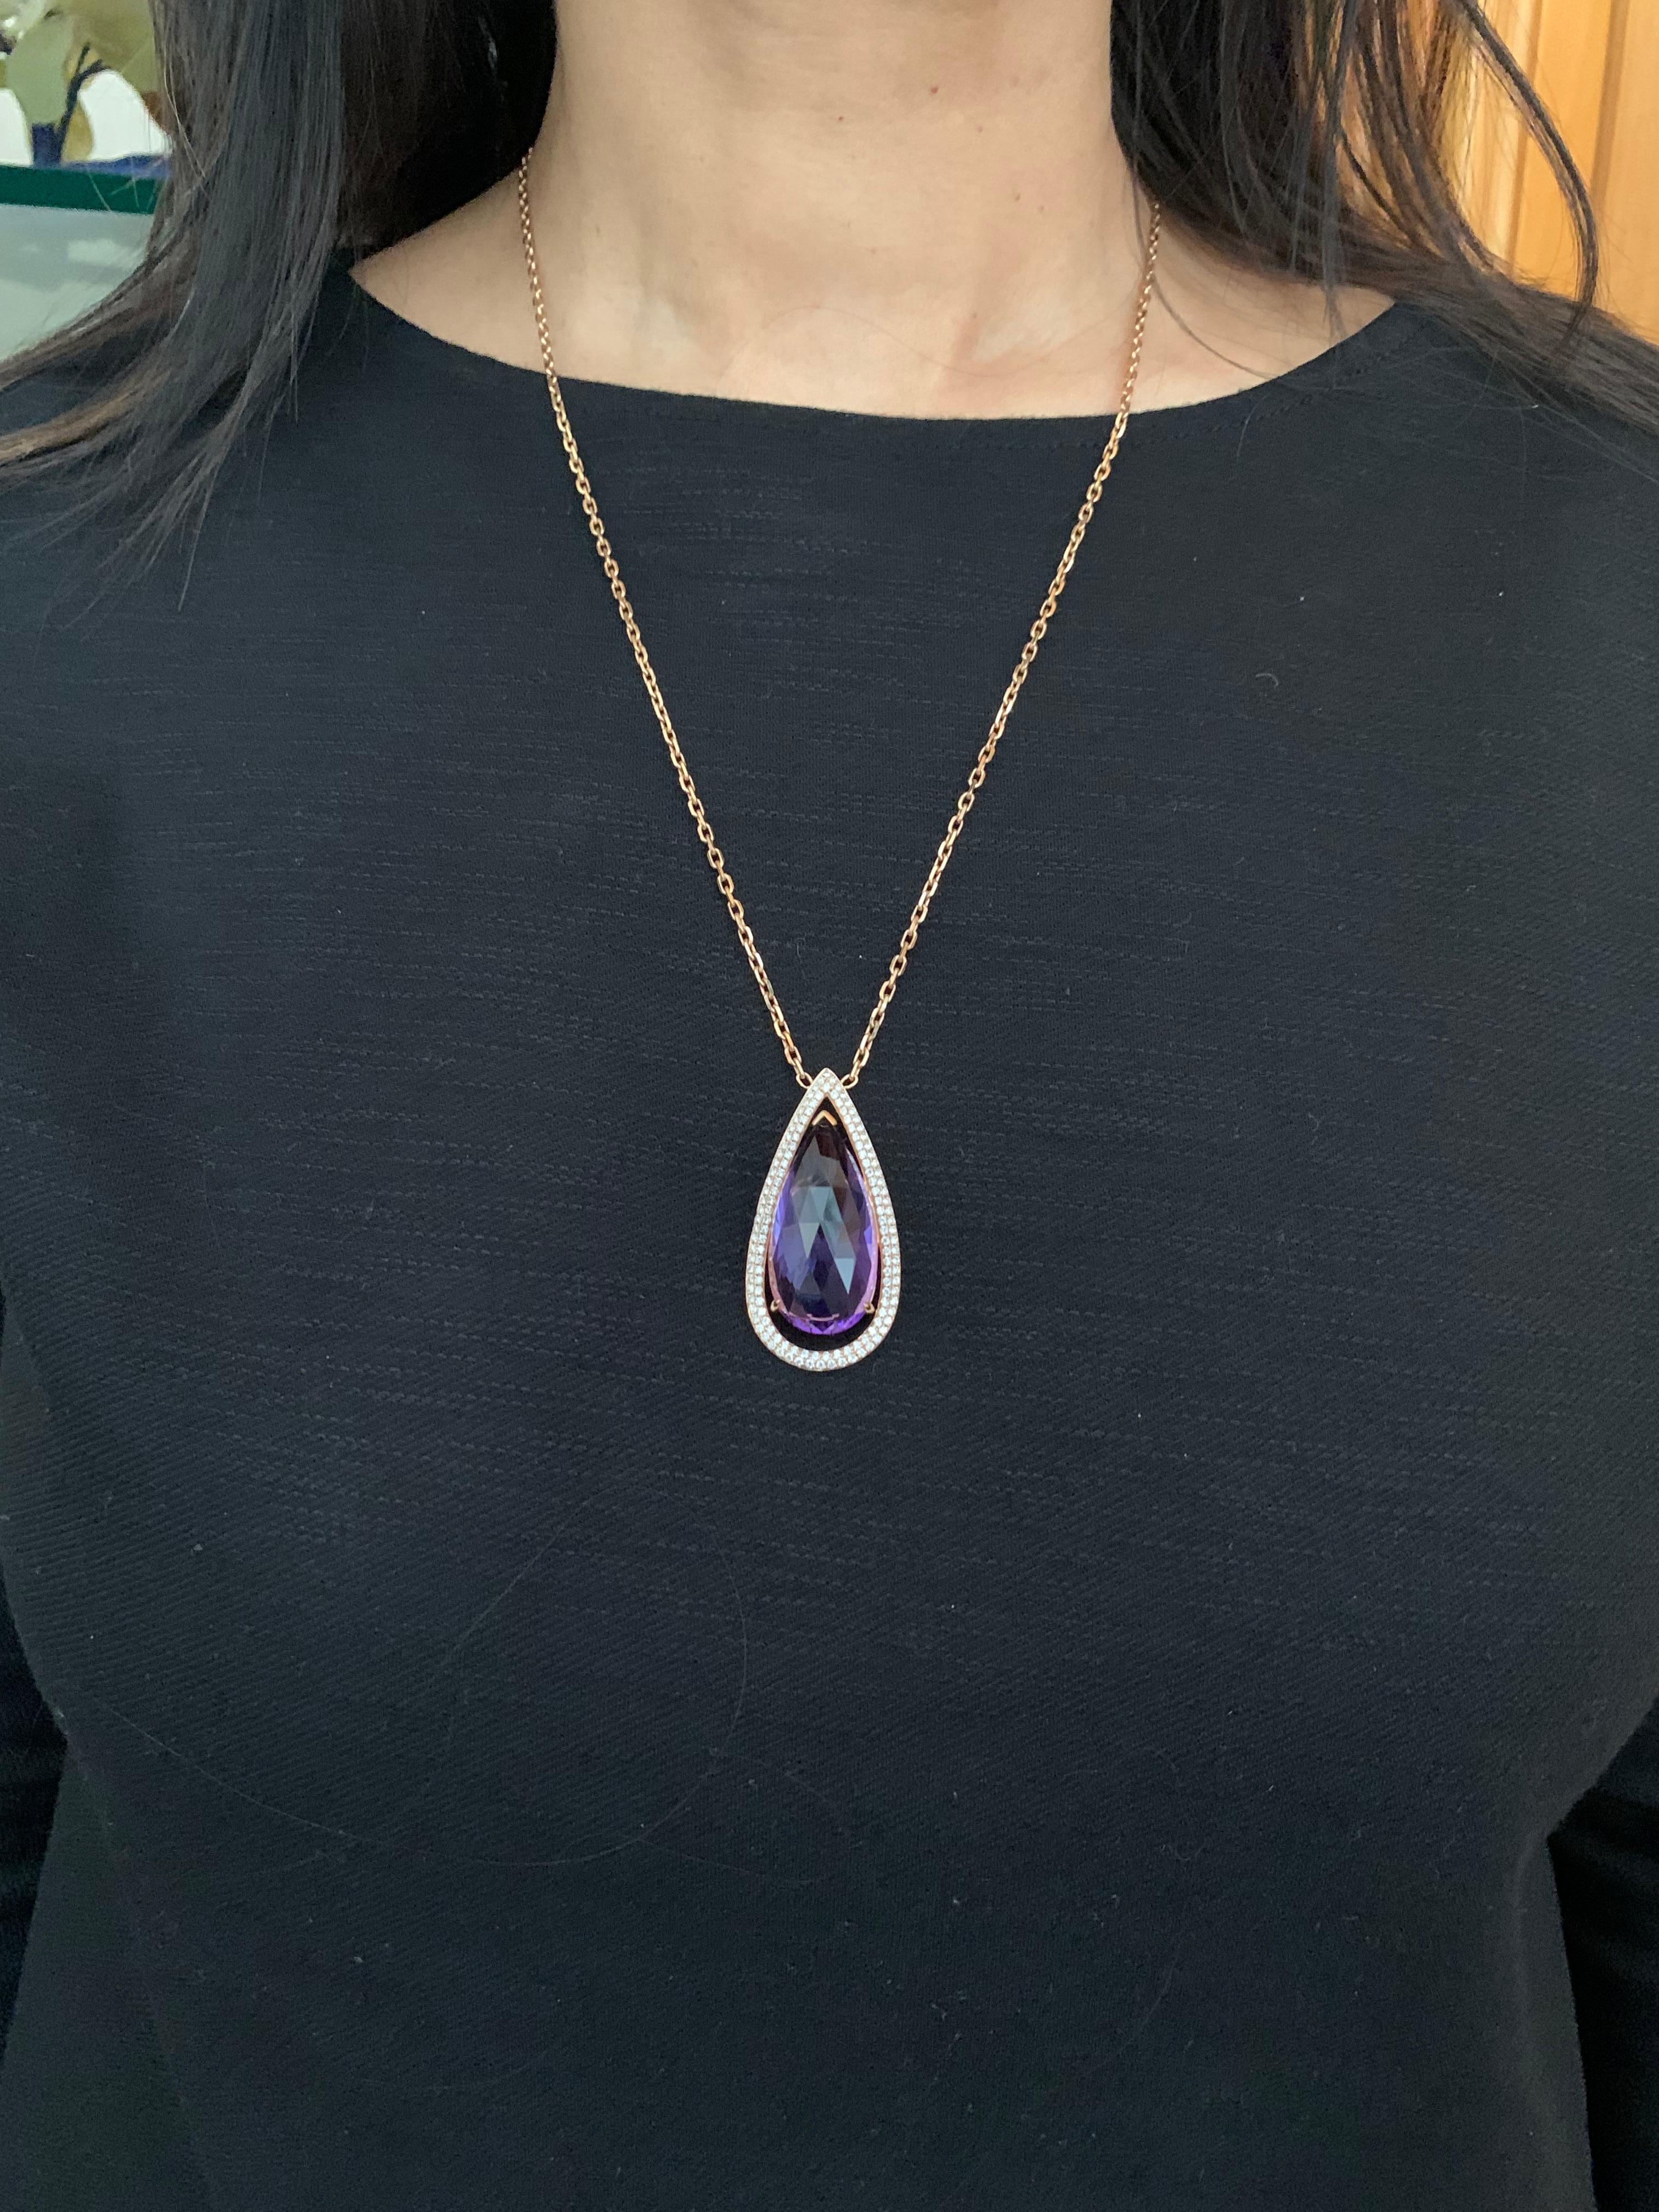 Gorgeous gemstones by Sunita Nahata... This collection features unique fancy cut color gemstones that are truly one of a kind and exclusive to Sunita Nahata Fine Design. This necklace features a stunning pear shaped Amethyst with a fancy cut.